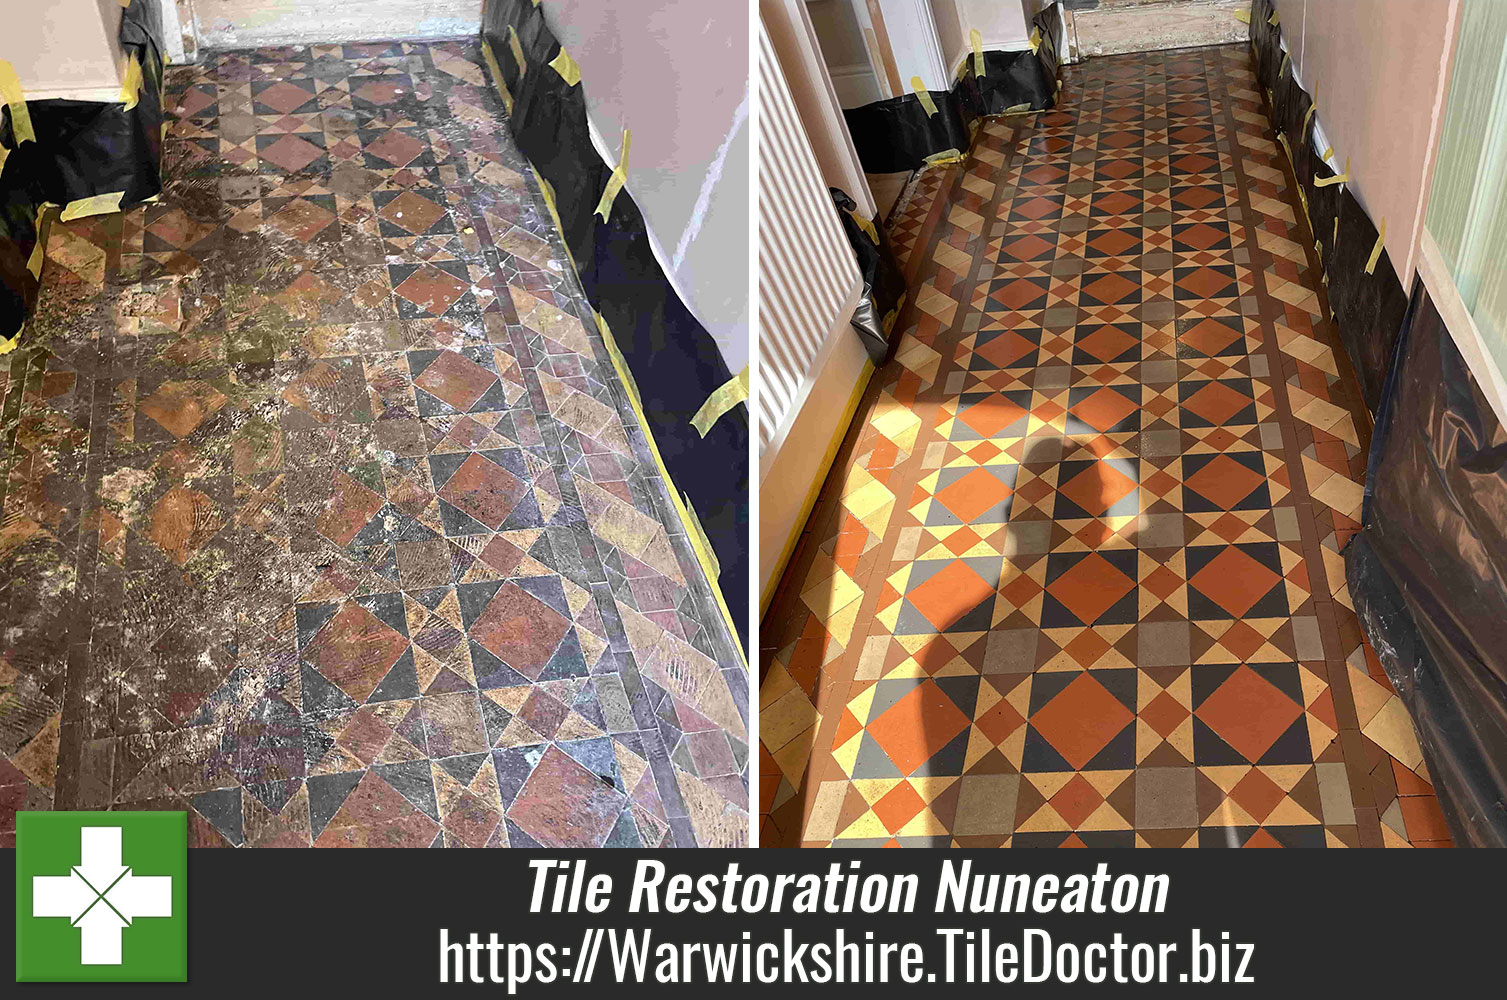 Removing Tar from Victorian Tiles with a Cocktail of Tile Doctor Products in Nuneaton